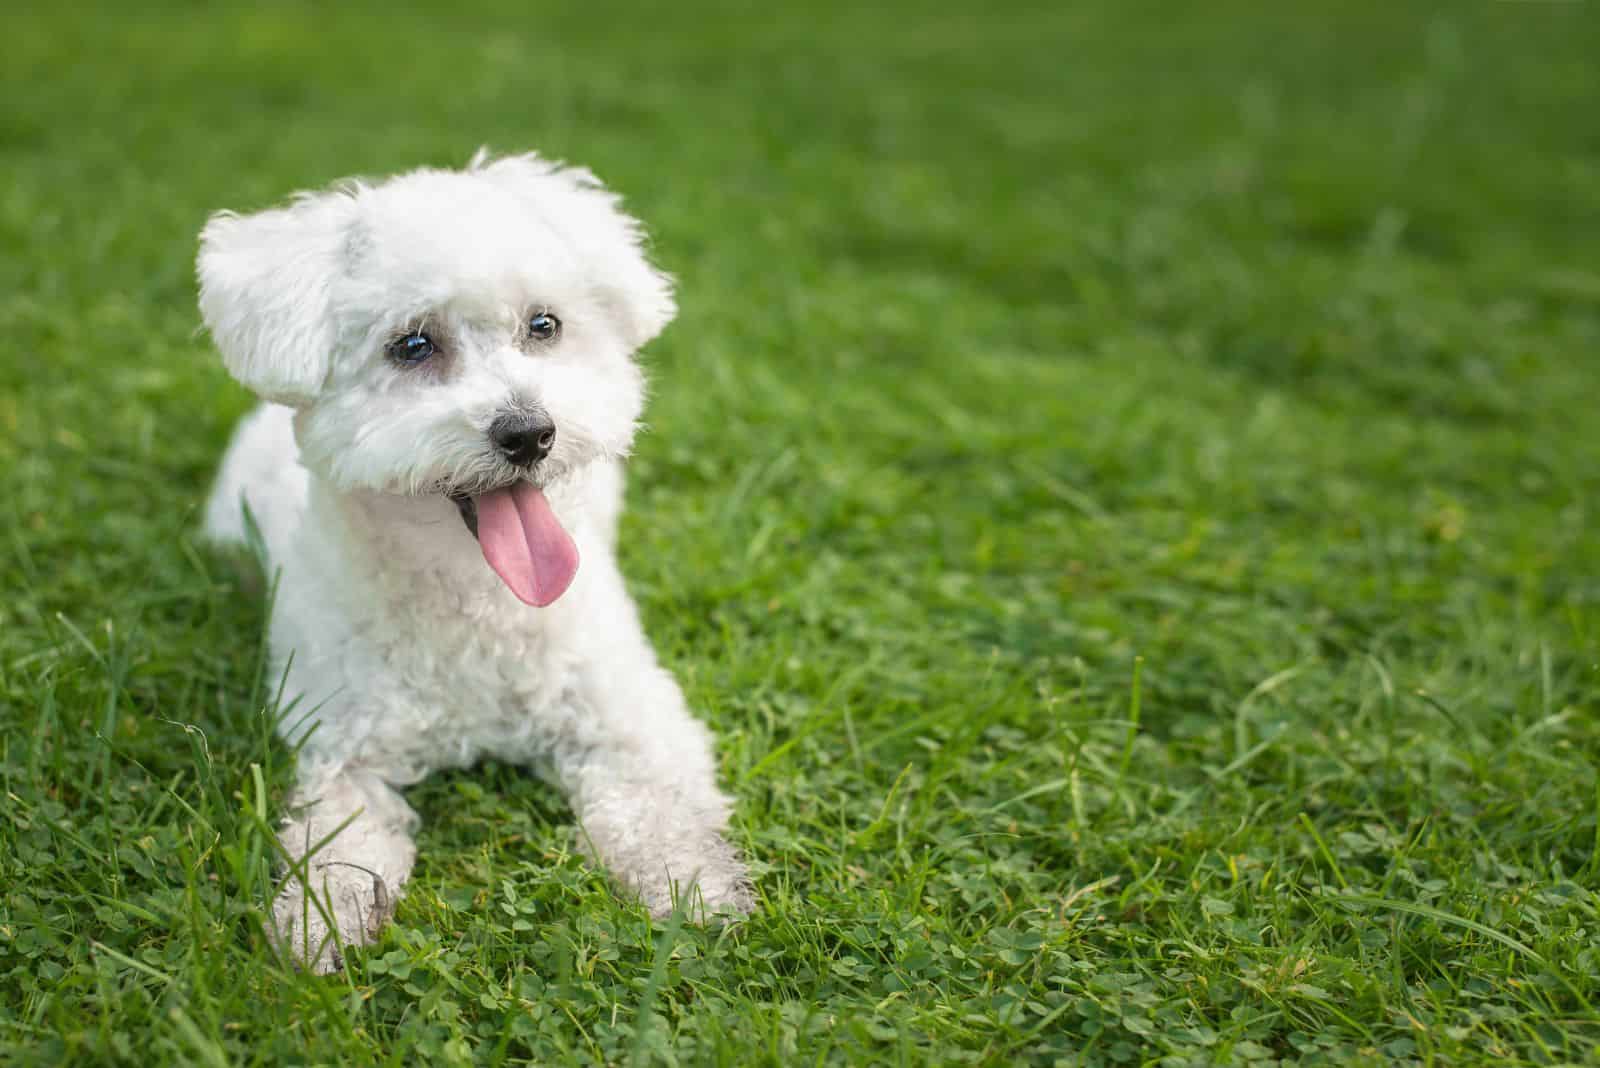 Bichon Frize lies with its tongue out